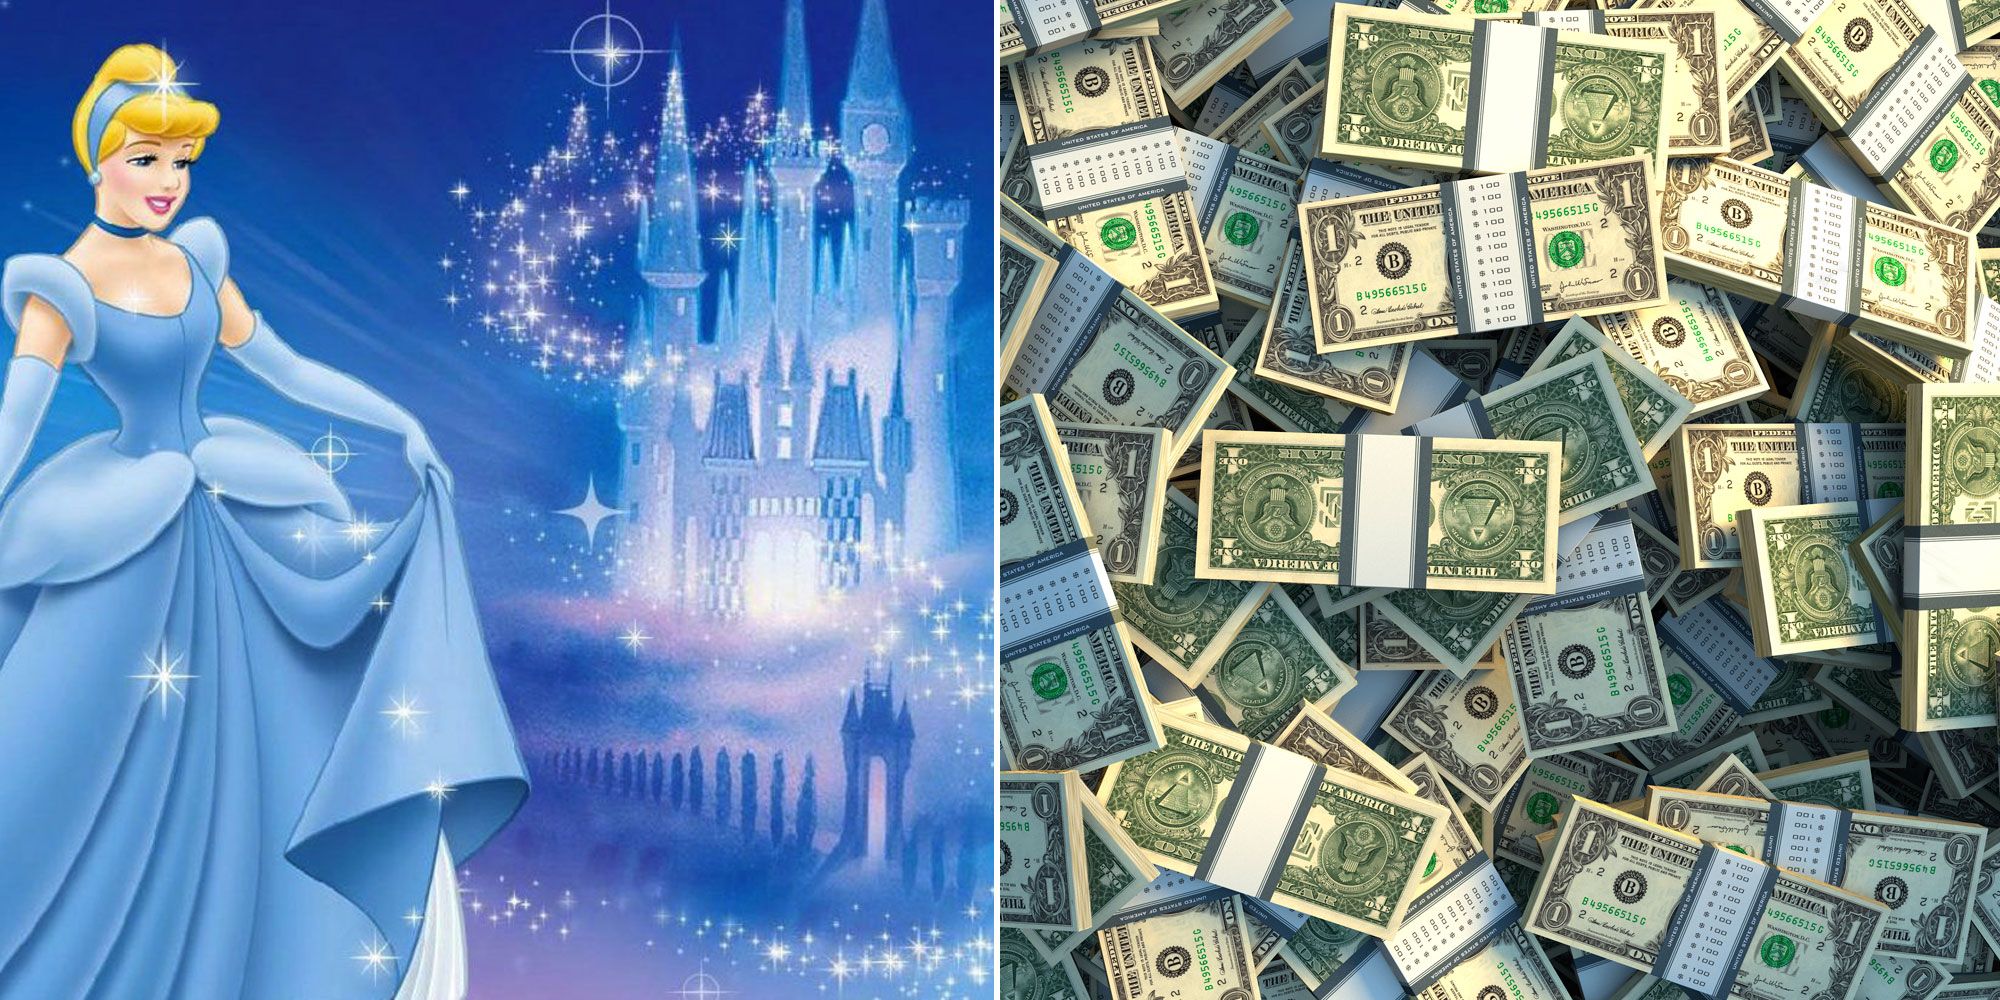 Disney Dream Weddings How Much It Costs To Get Married In Front